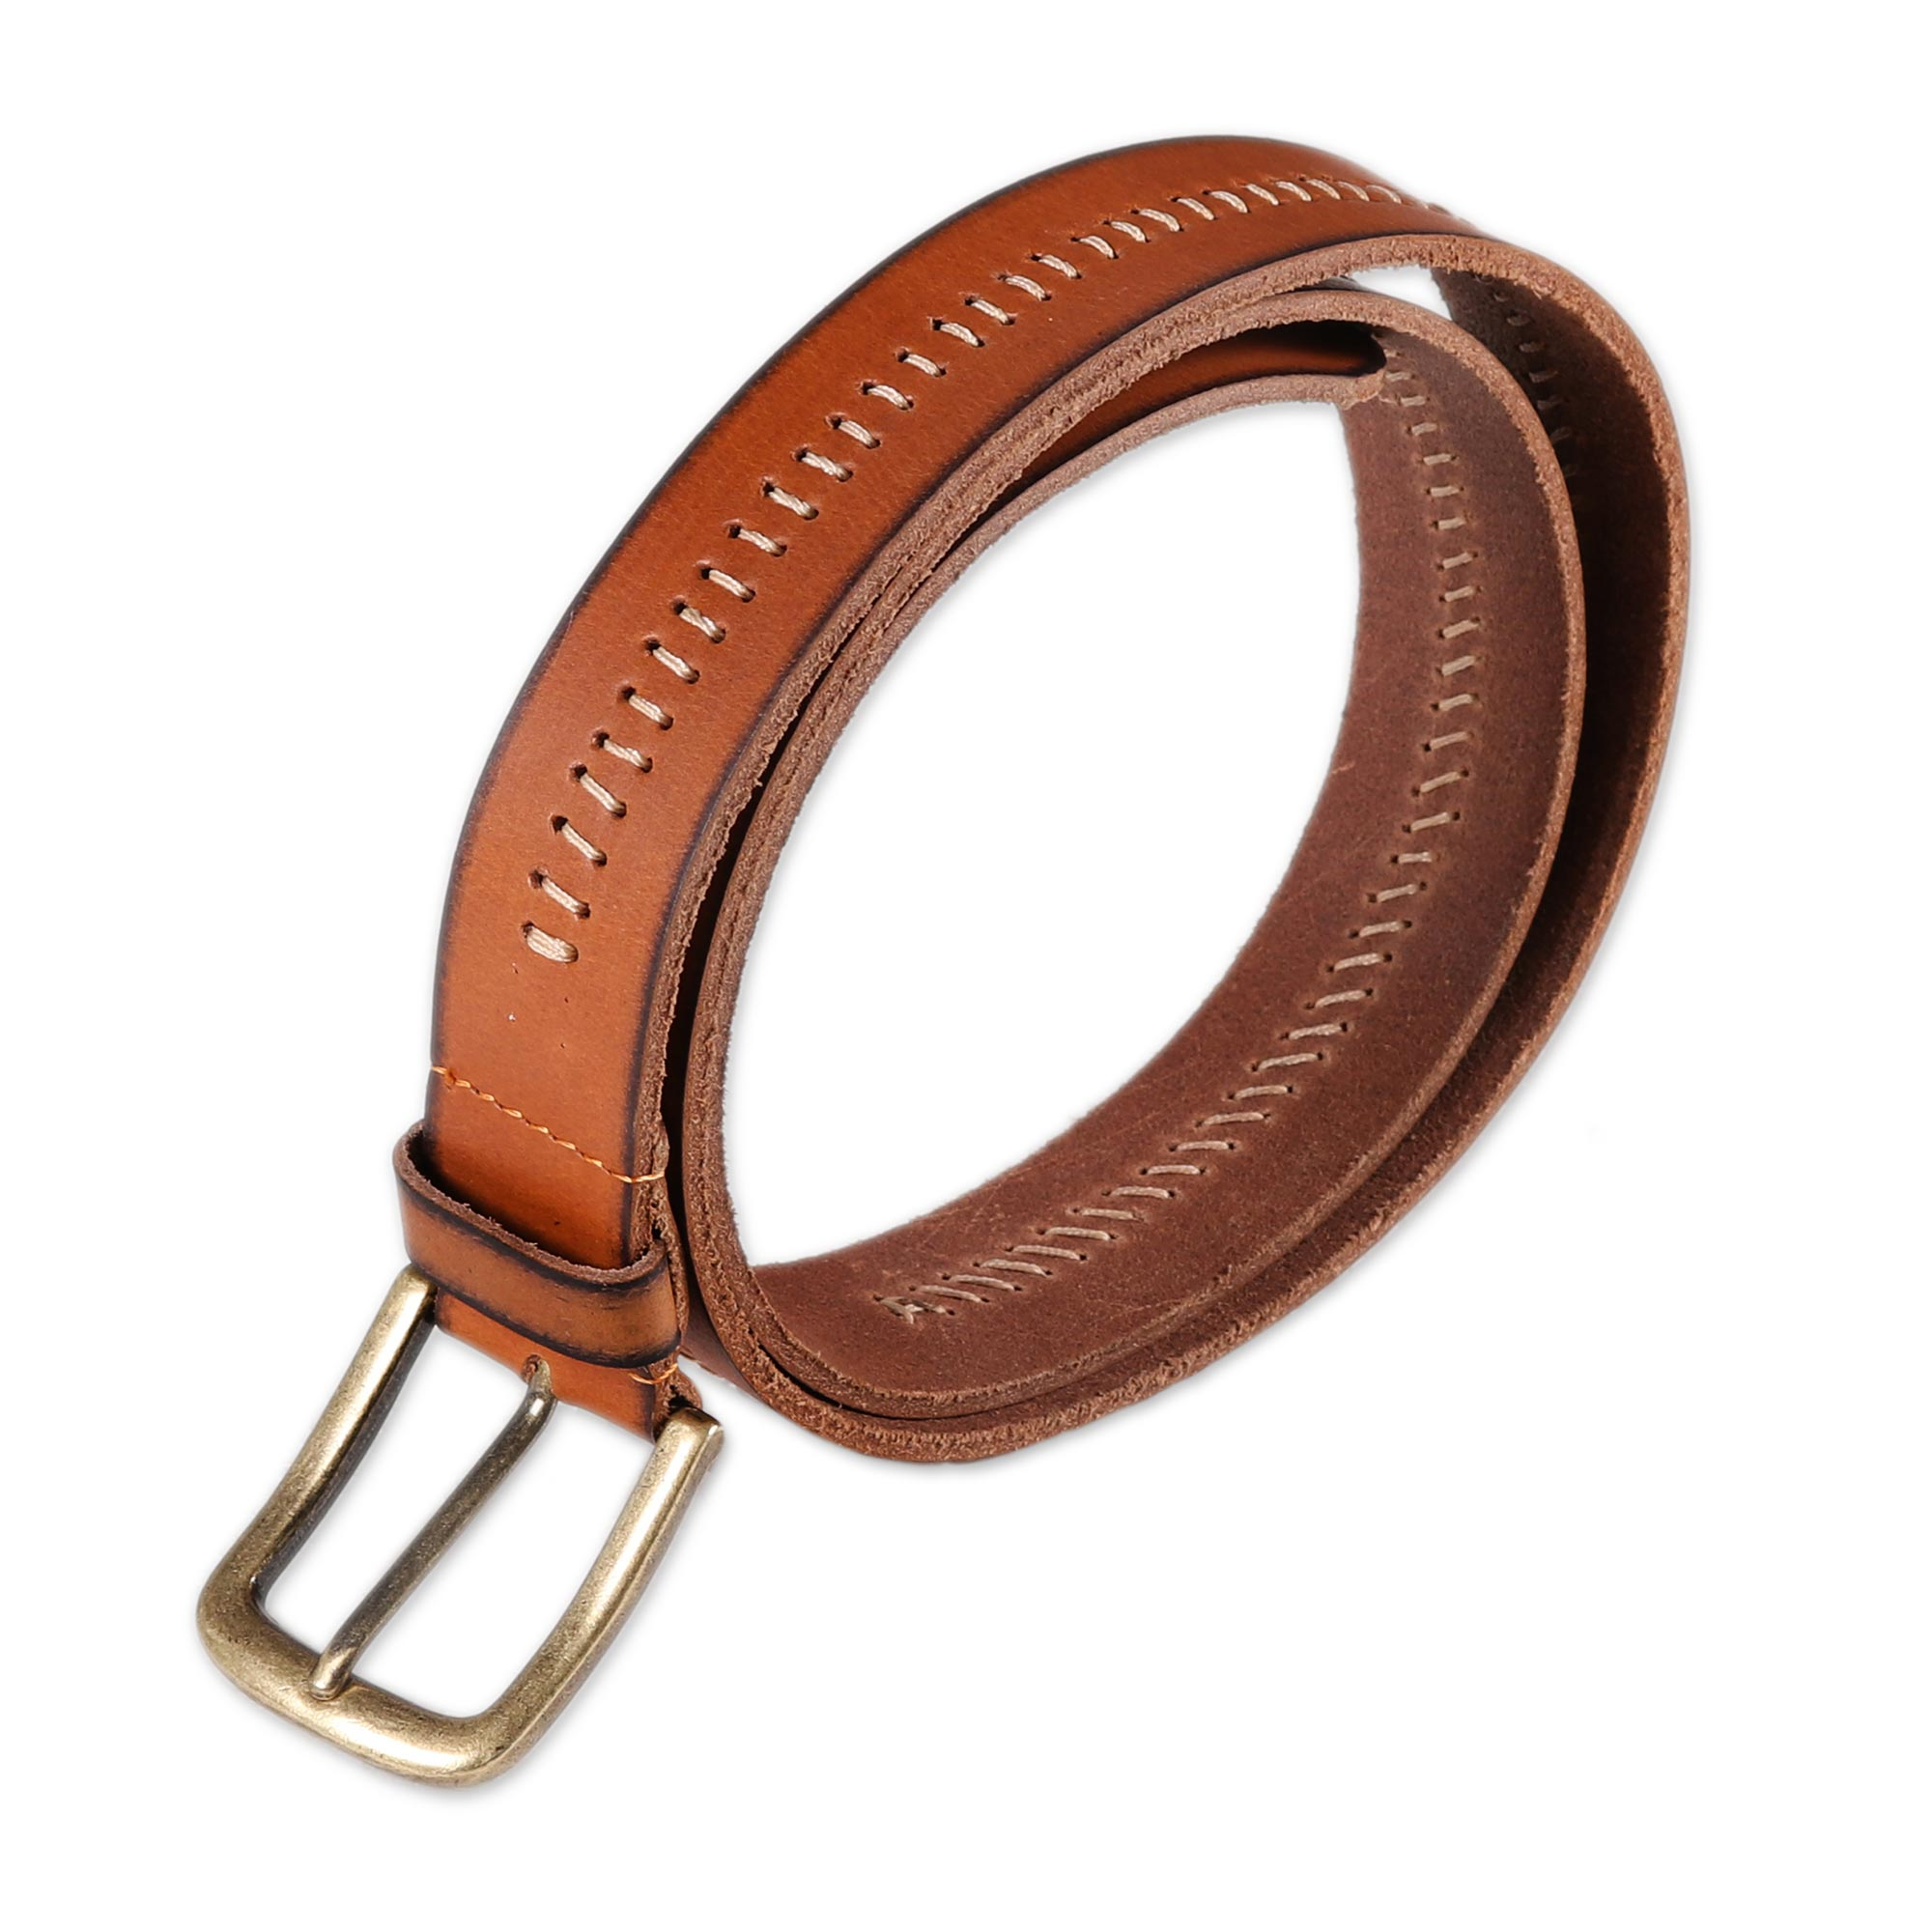 UNICEF Market | Handcrafted Men's Leather Belt in Spice from India ...